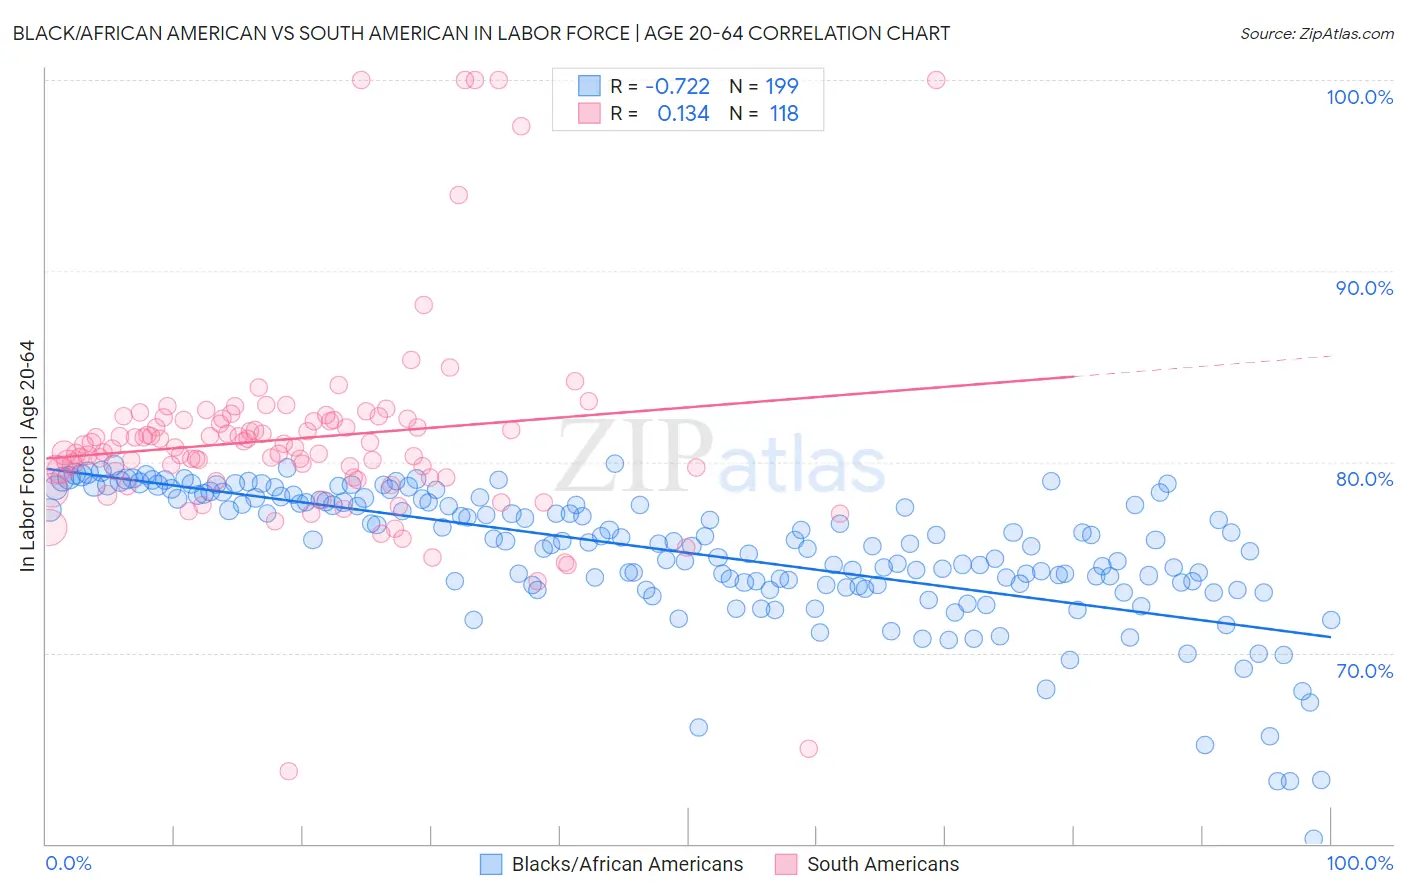 Black/African American vs South American In Labor Force | Age 20-64